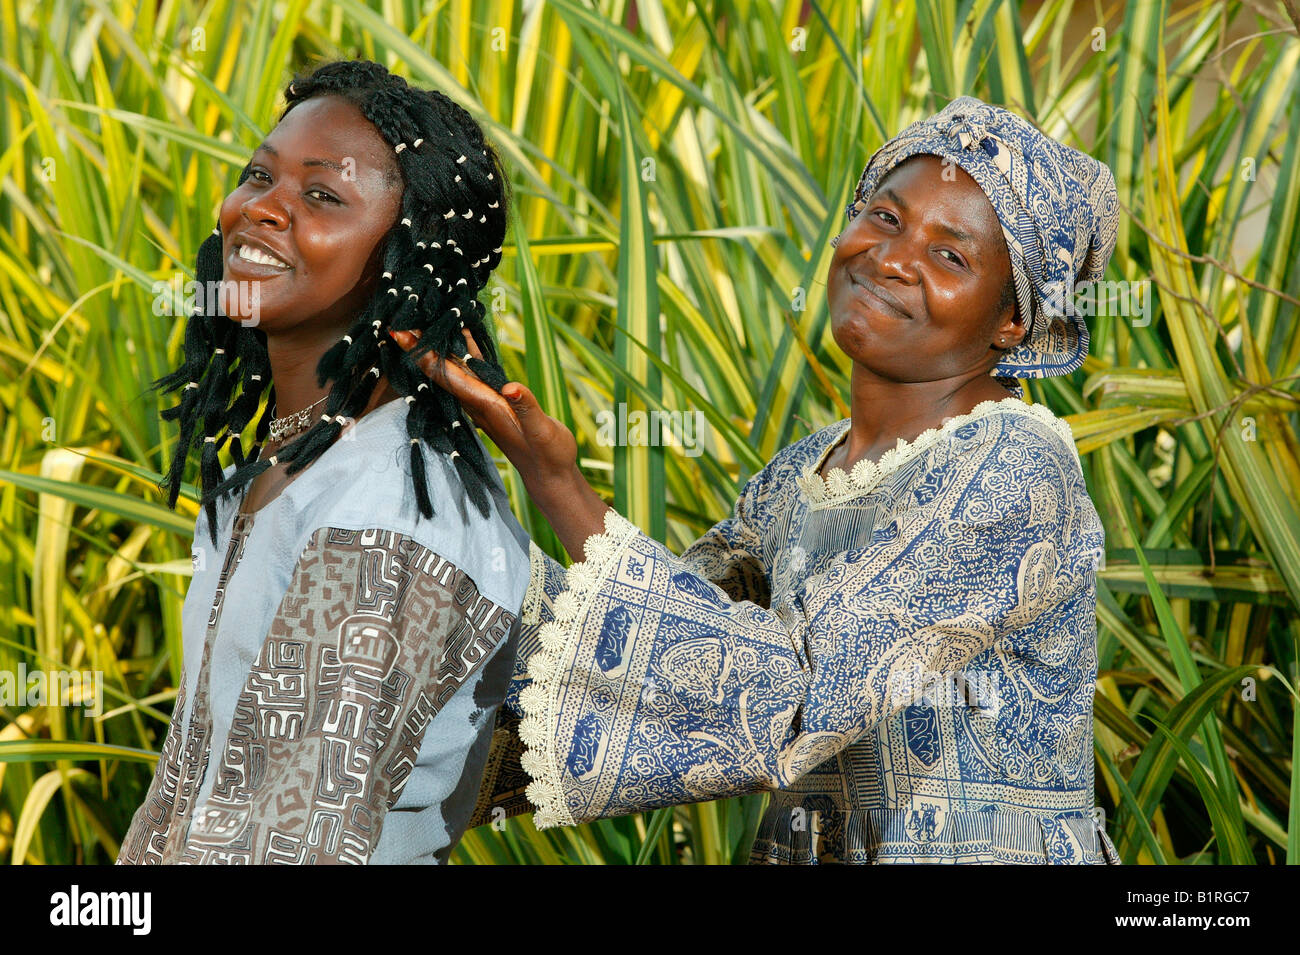 Seamstresses of an HIV help group modelling self-made clothes, Bafut, Cameroun, Africa Stock Photo